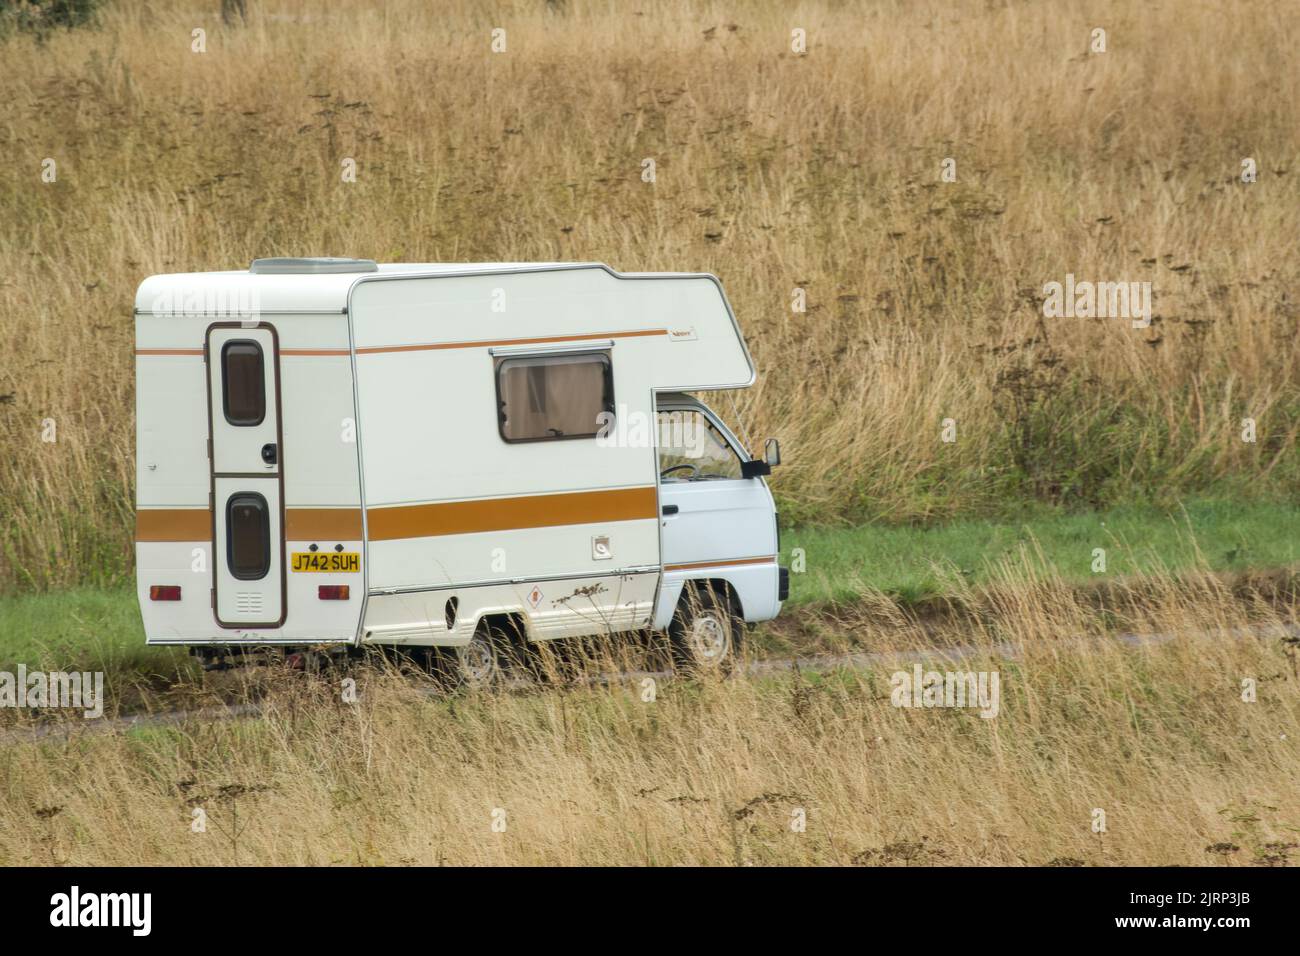 Vauxhall Bedford Rascal 1991 Nipper, 3 Berth, Overcab bed Campervan driving through parched summer countryside Stock Photo